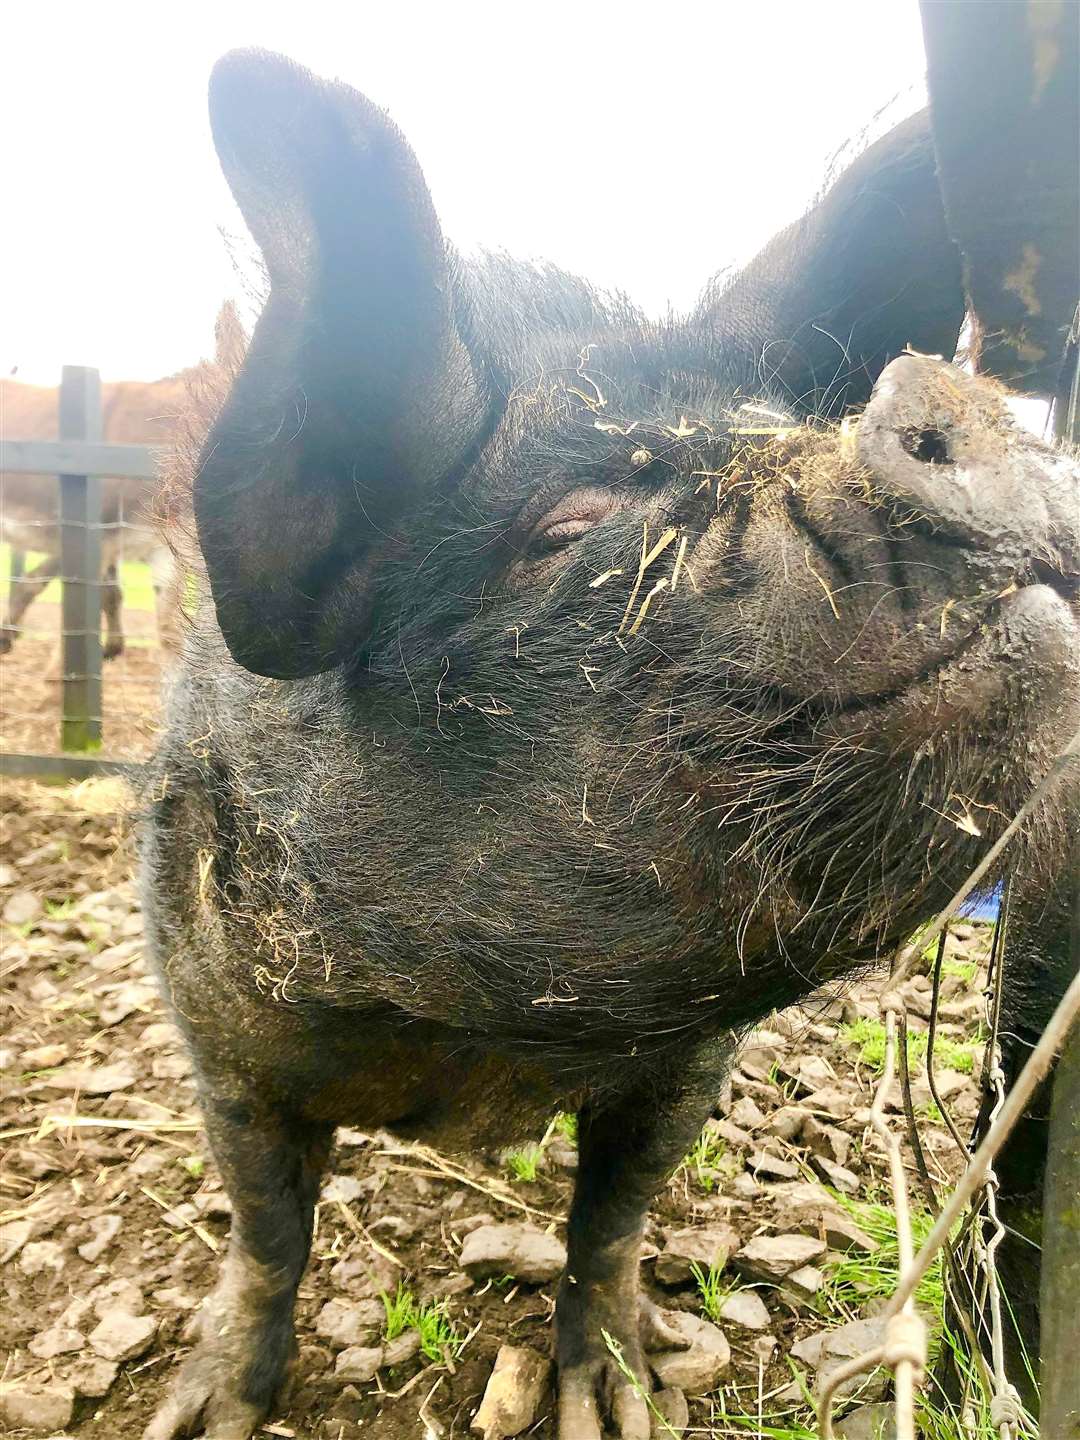 Dolly is a kune kune pig of about 11.